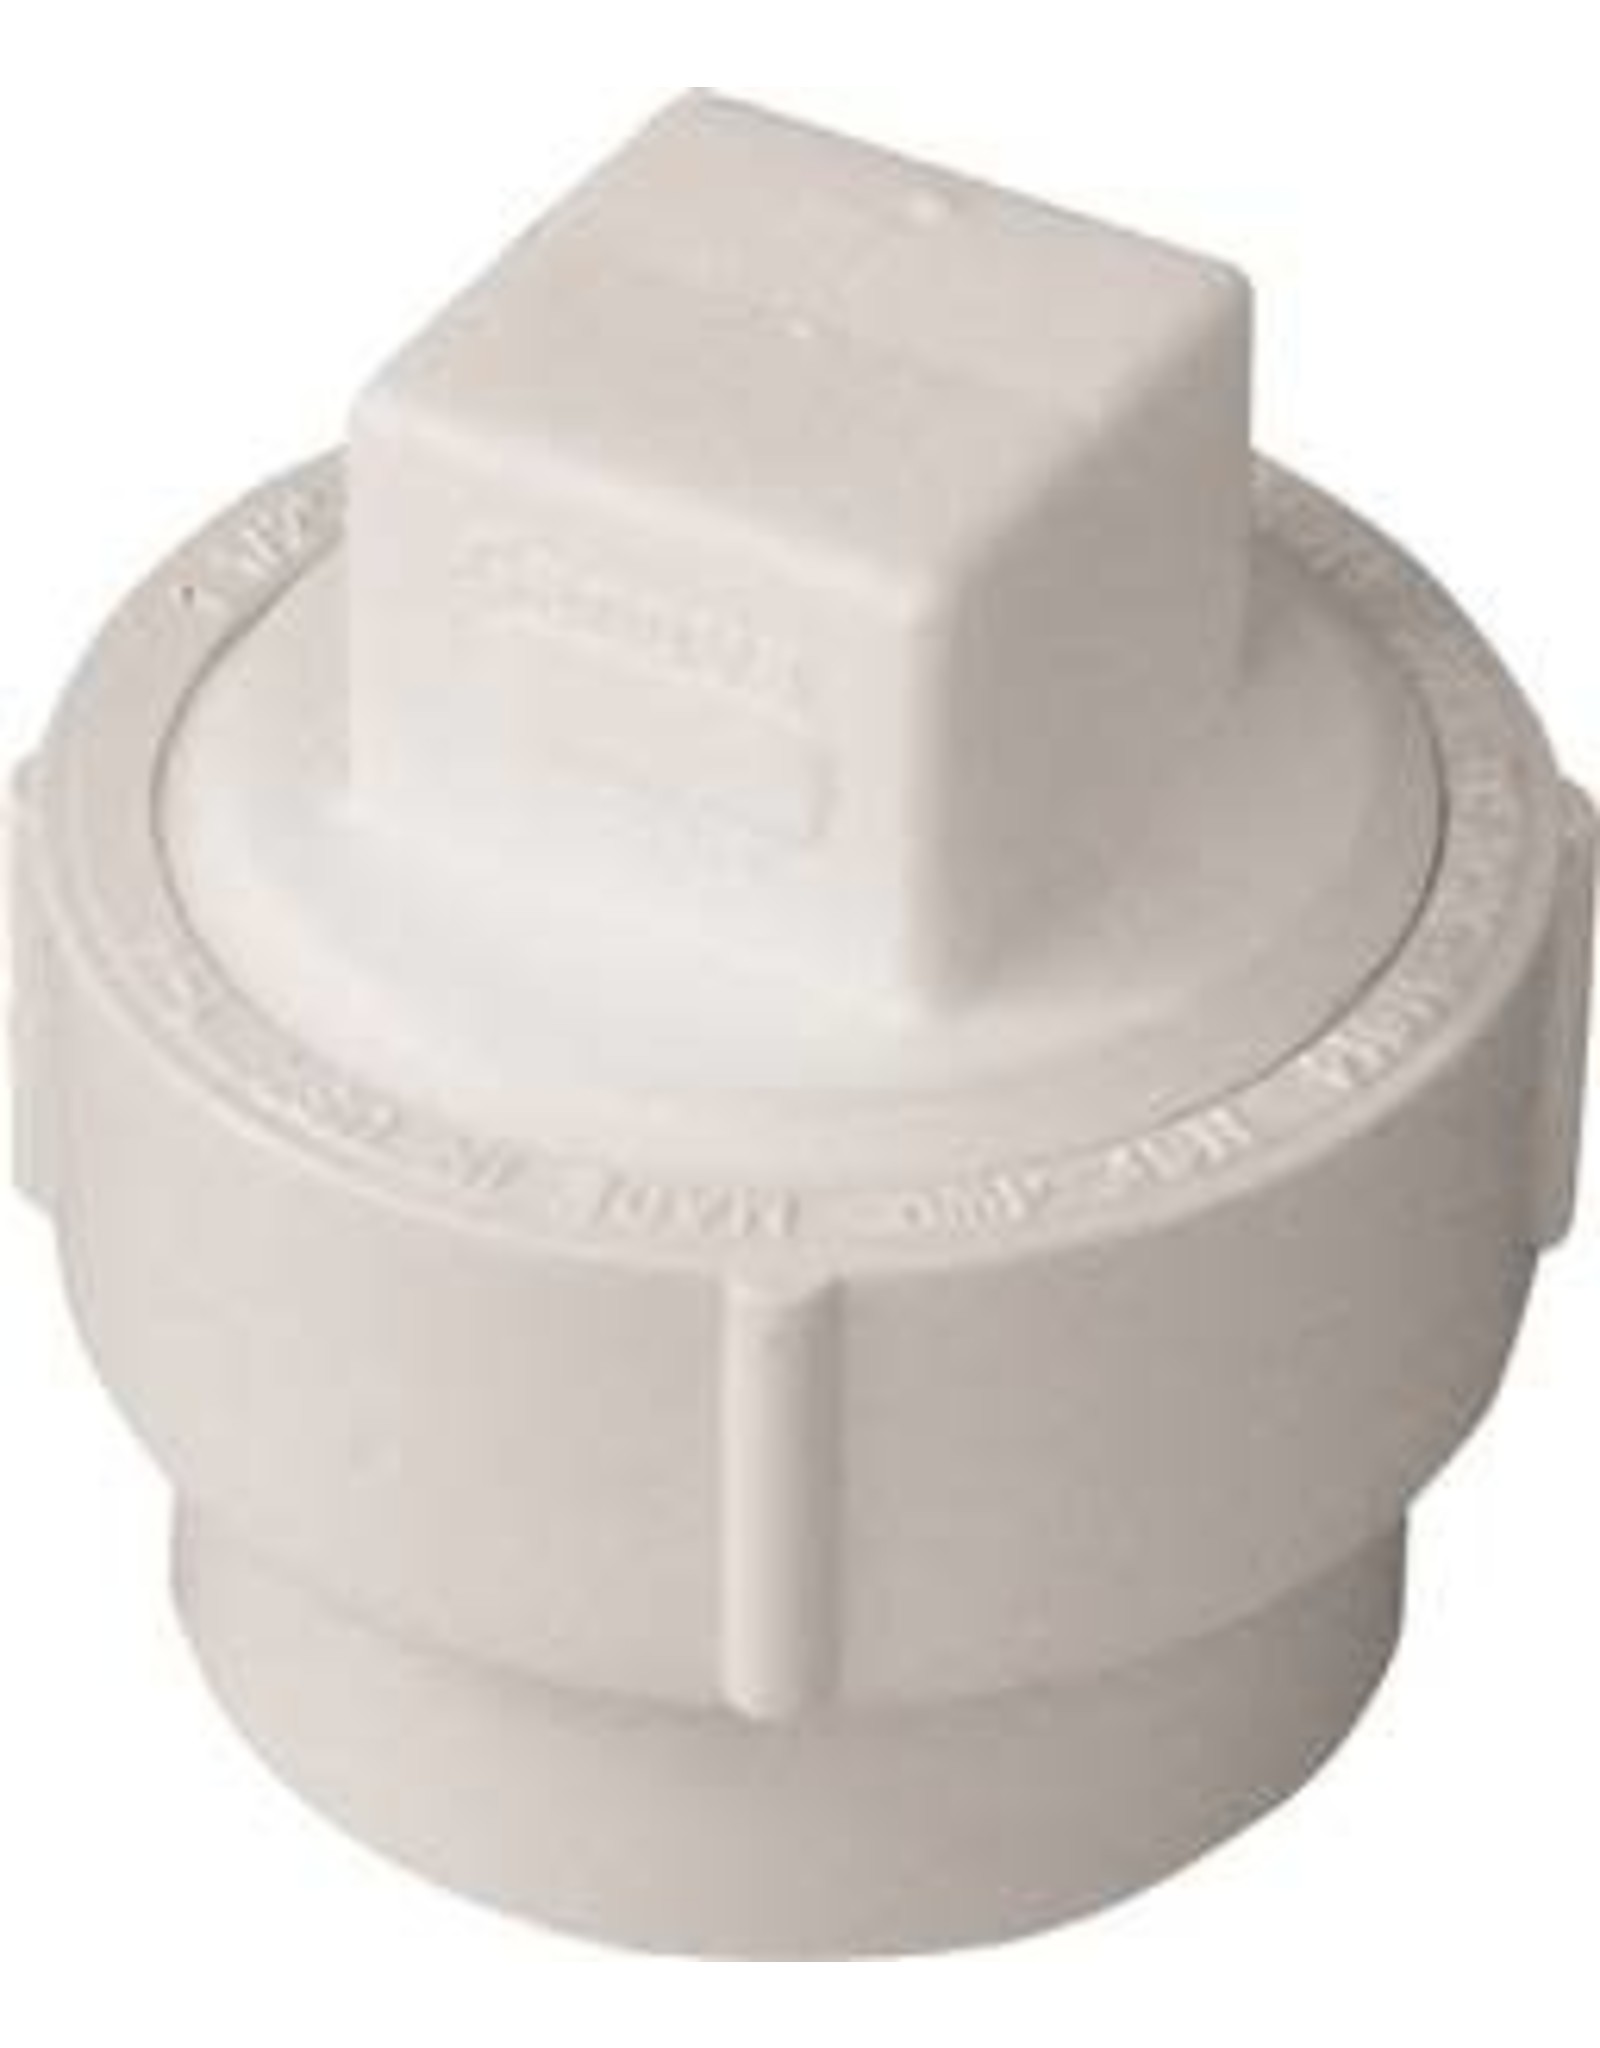 Ipex CANPLAS 193703AS Cleanout Body with Threaded Plug, 3 in, Spigot x FNPT, PVC, White